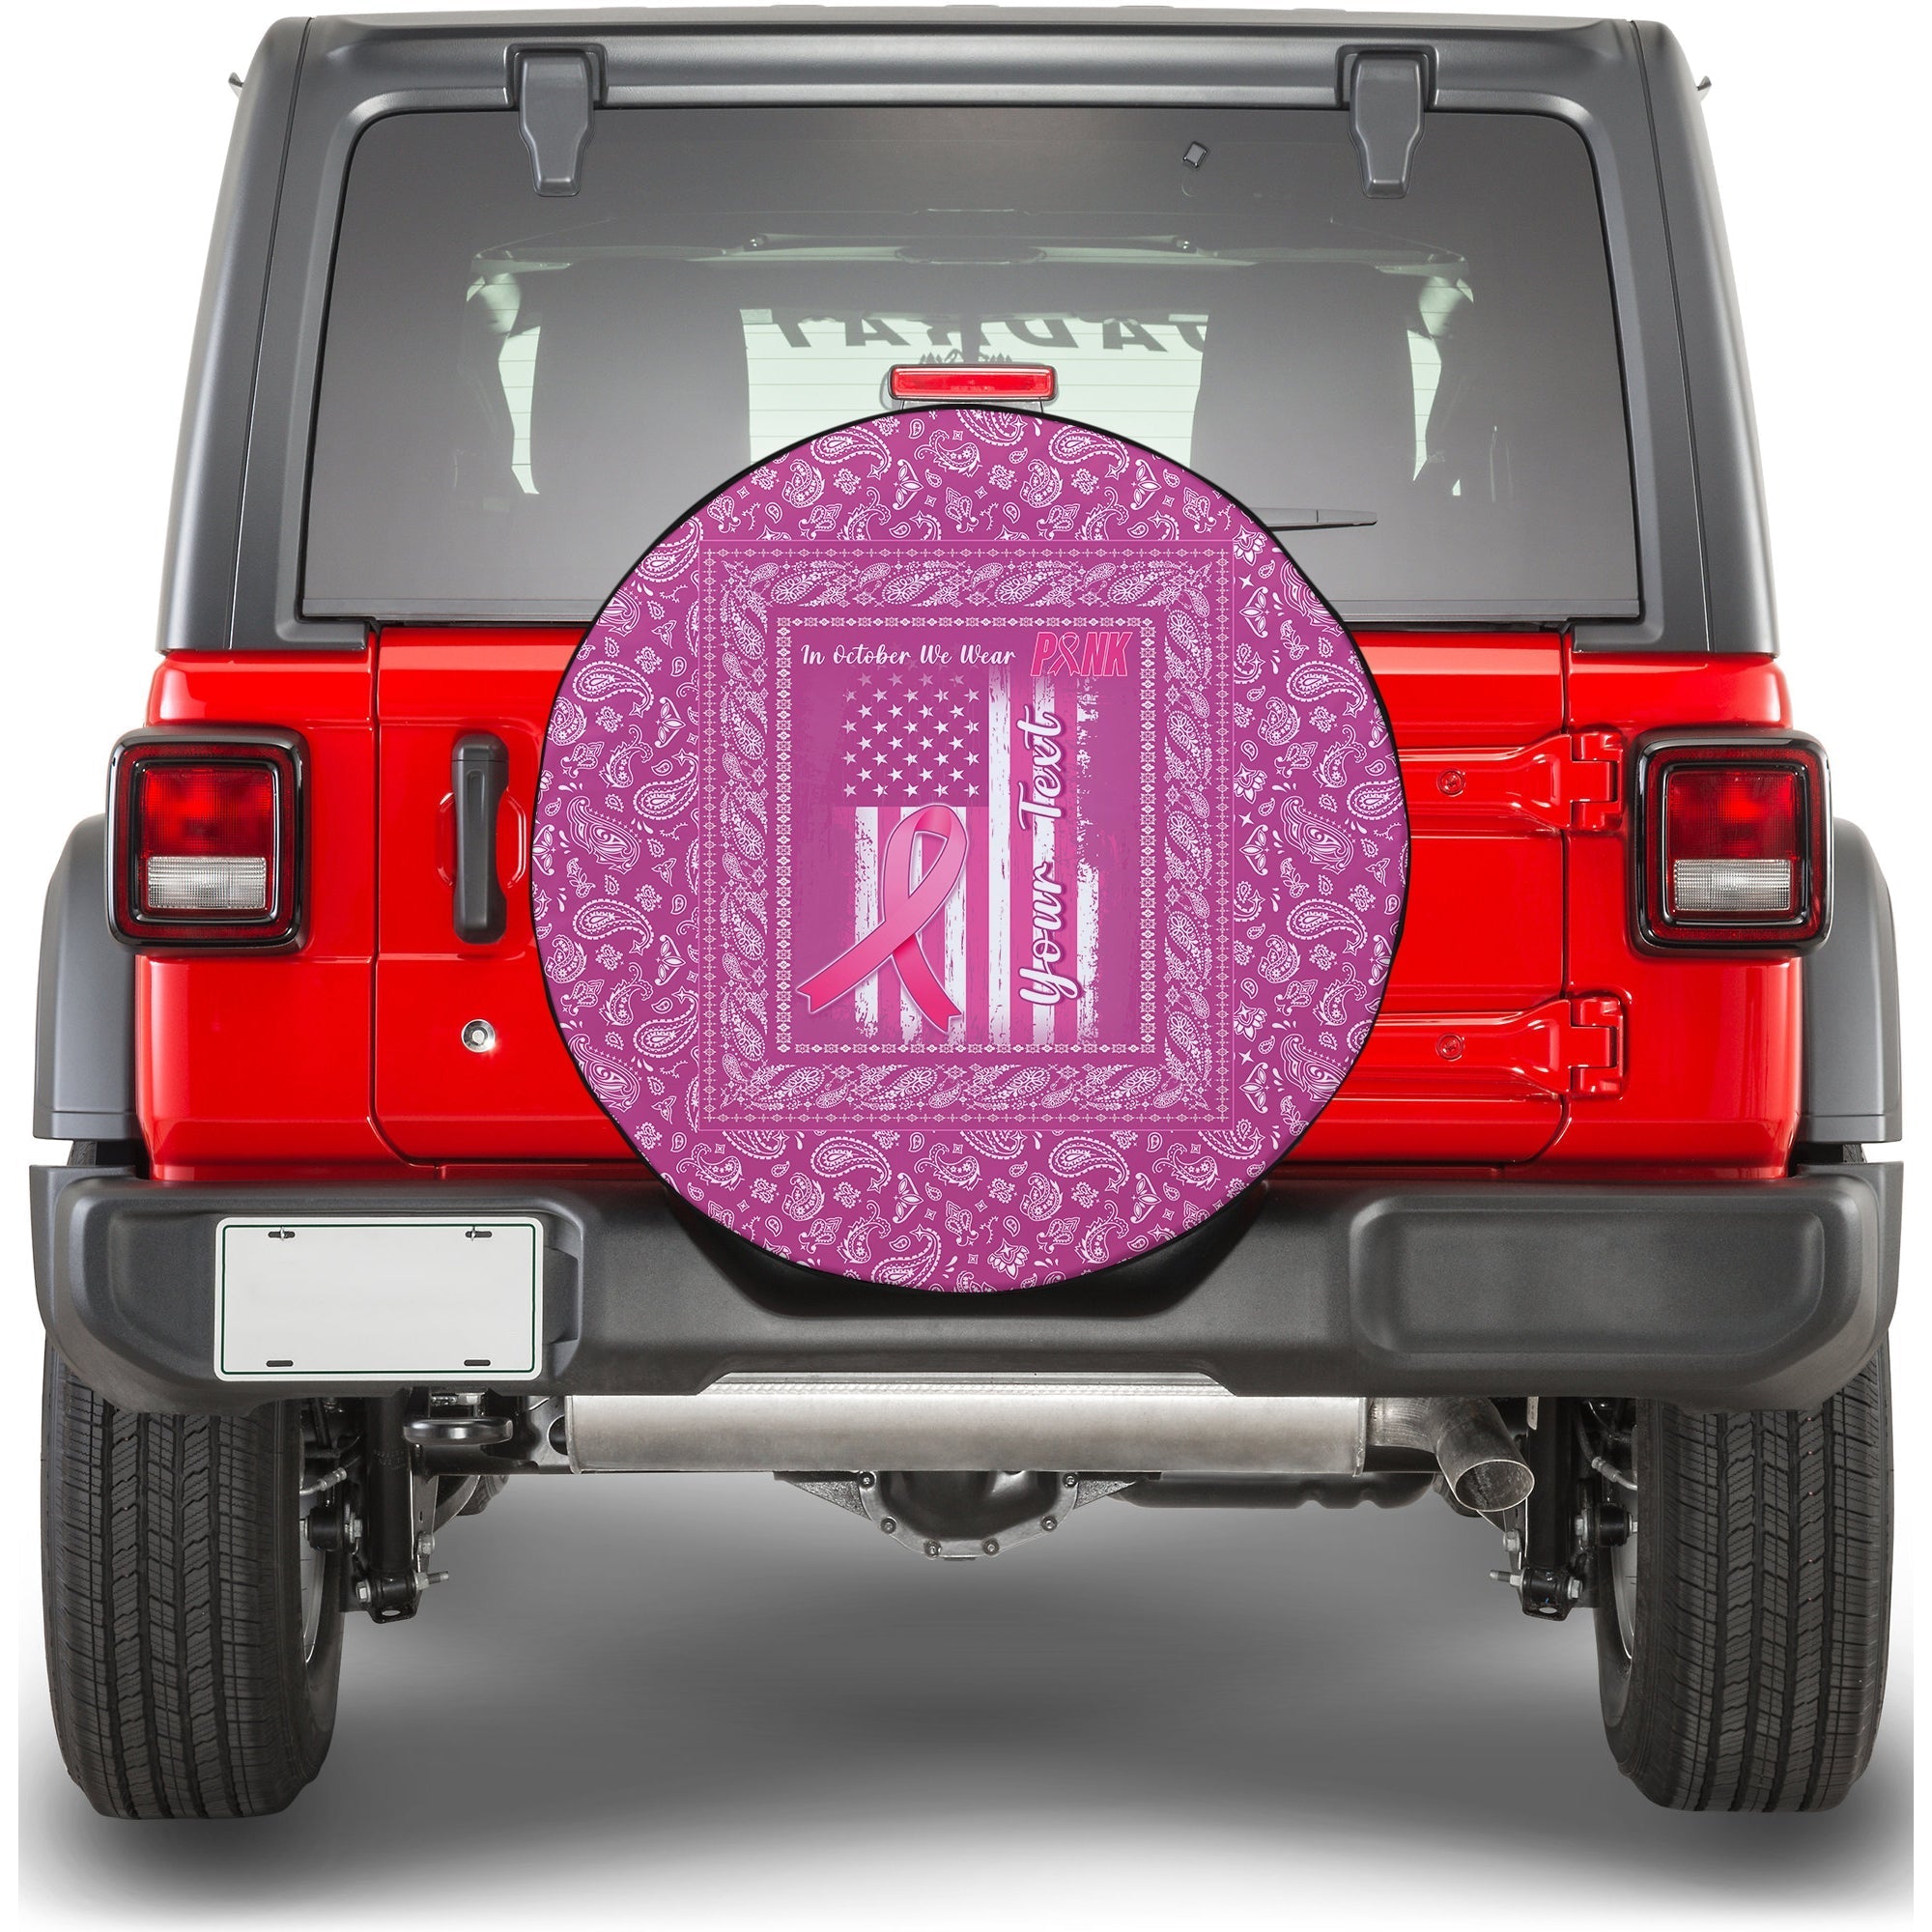 custom-personalised-breast-cancer-spare-tire-cover-pink-paisley-pattern-in-october-we-wear-pink